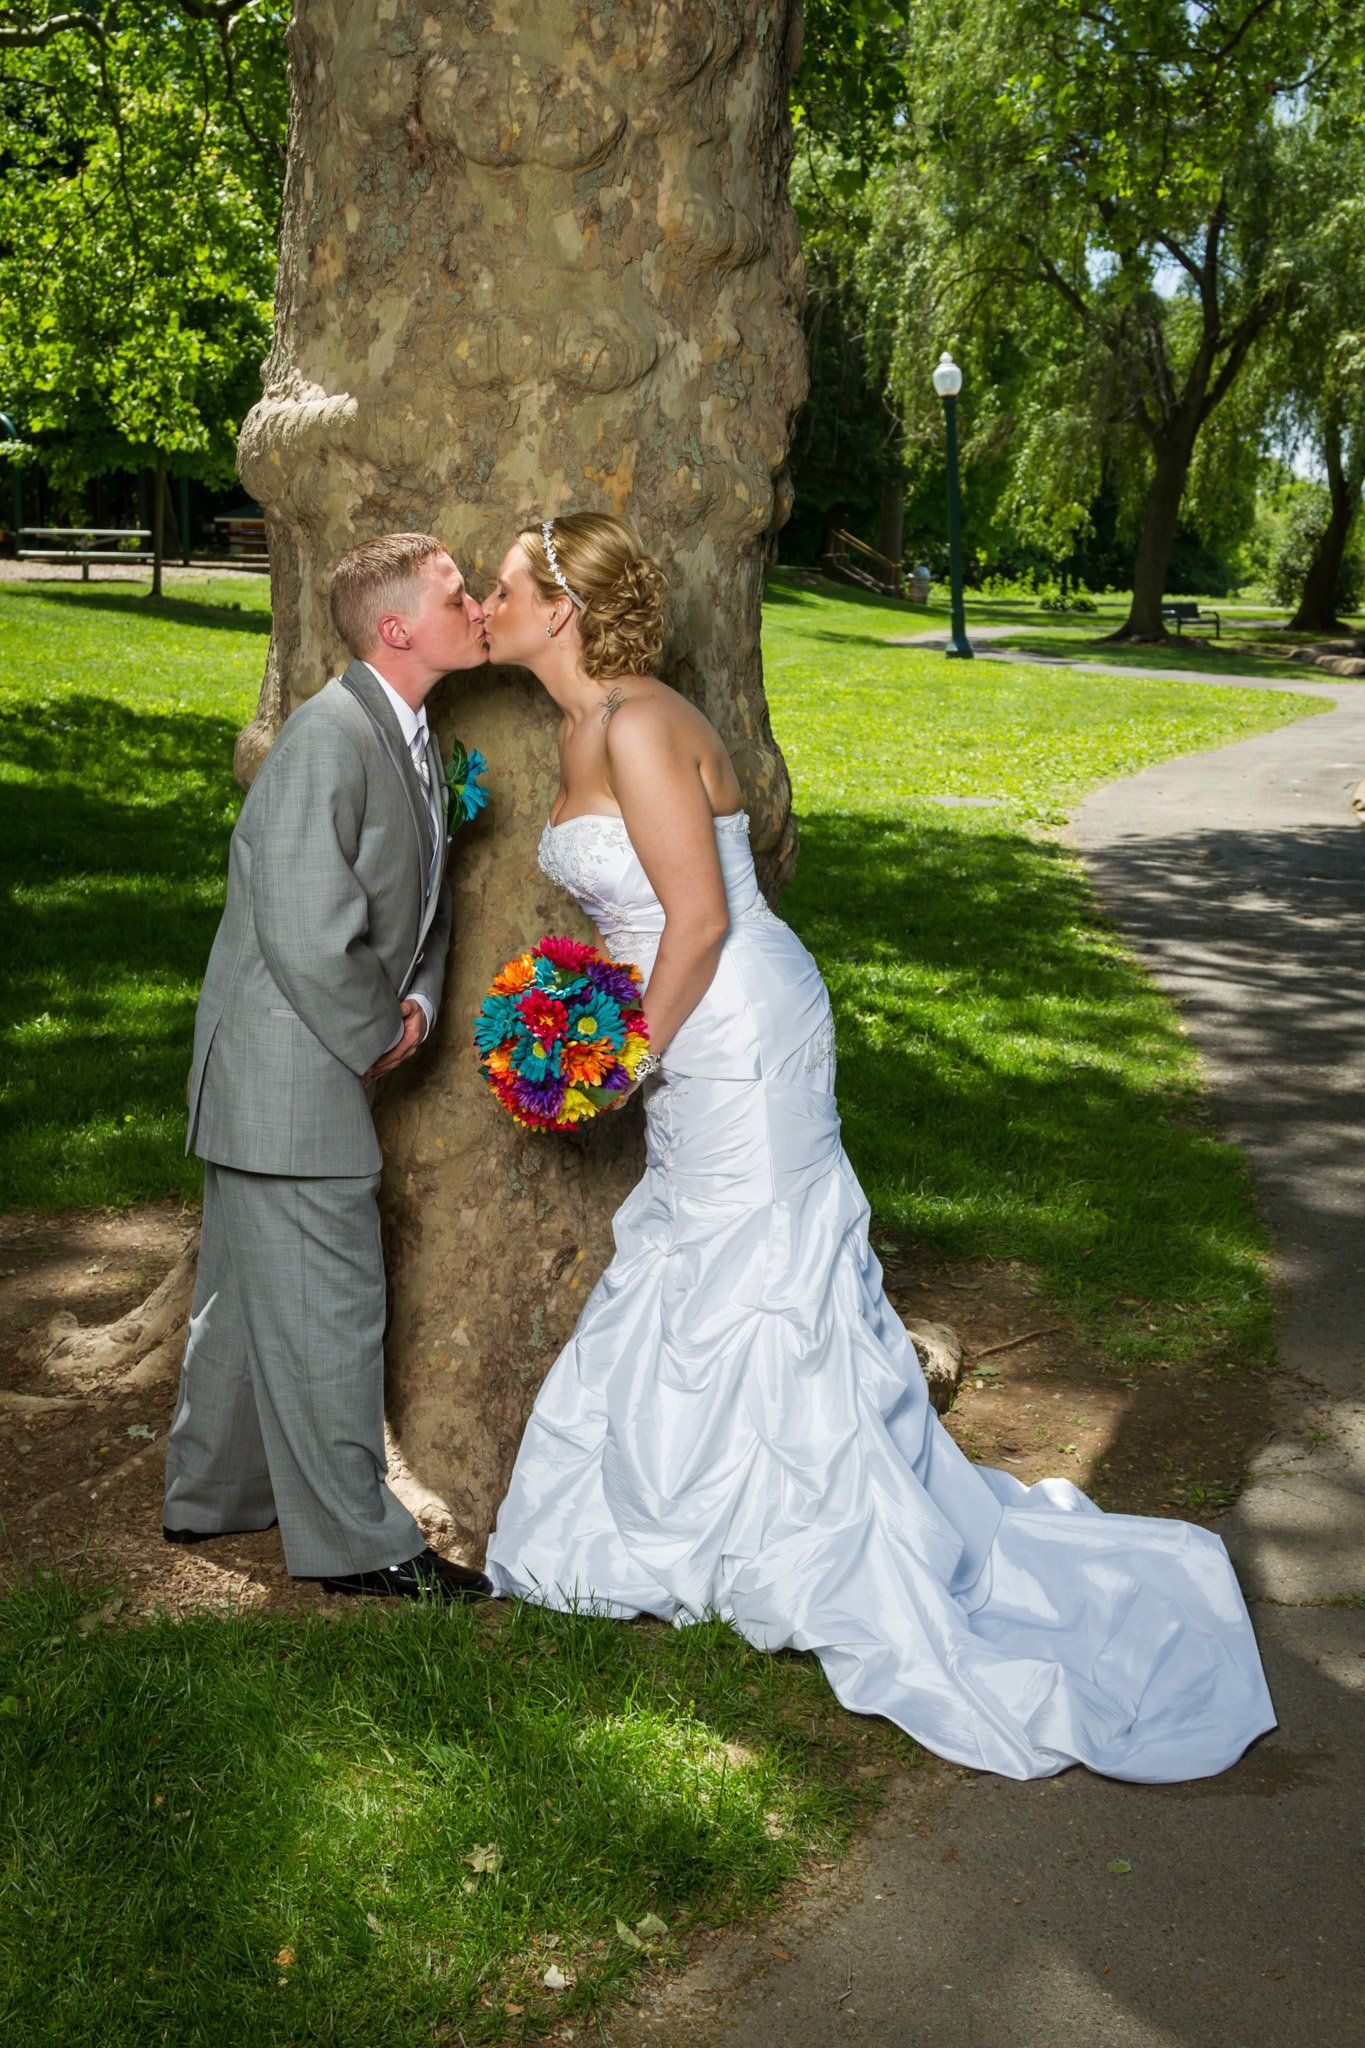 An outdoor portrait of a newly married couple kissing in front of a large tree